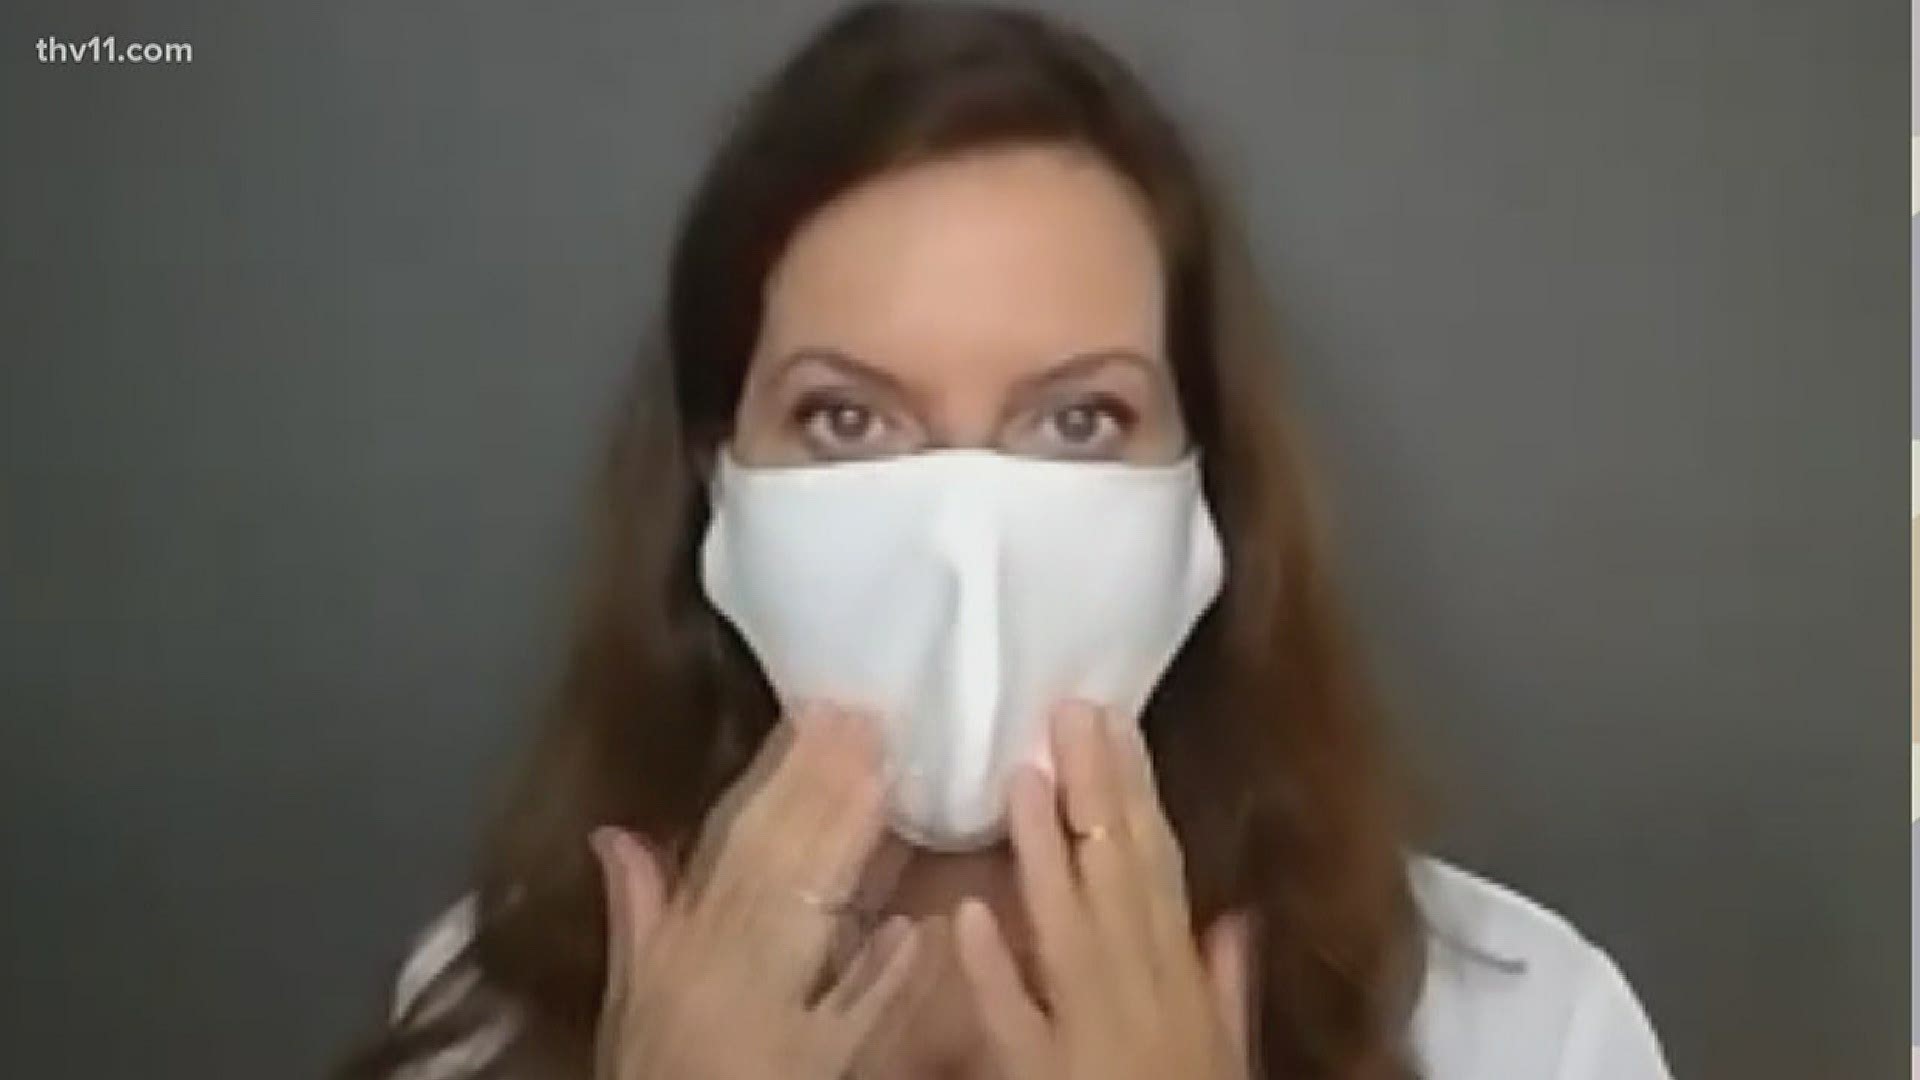 Boomer Naturals gives advice for what kind of face masks to wear to help prevent COVID-19.